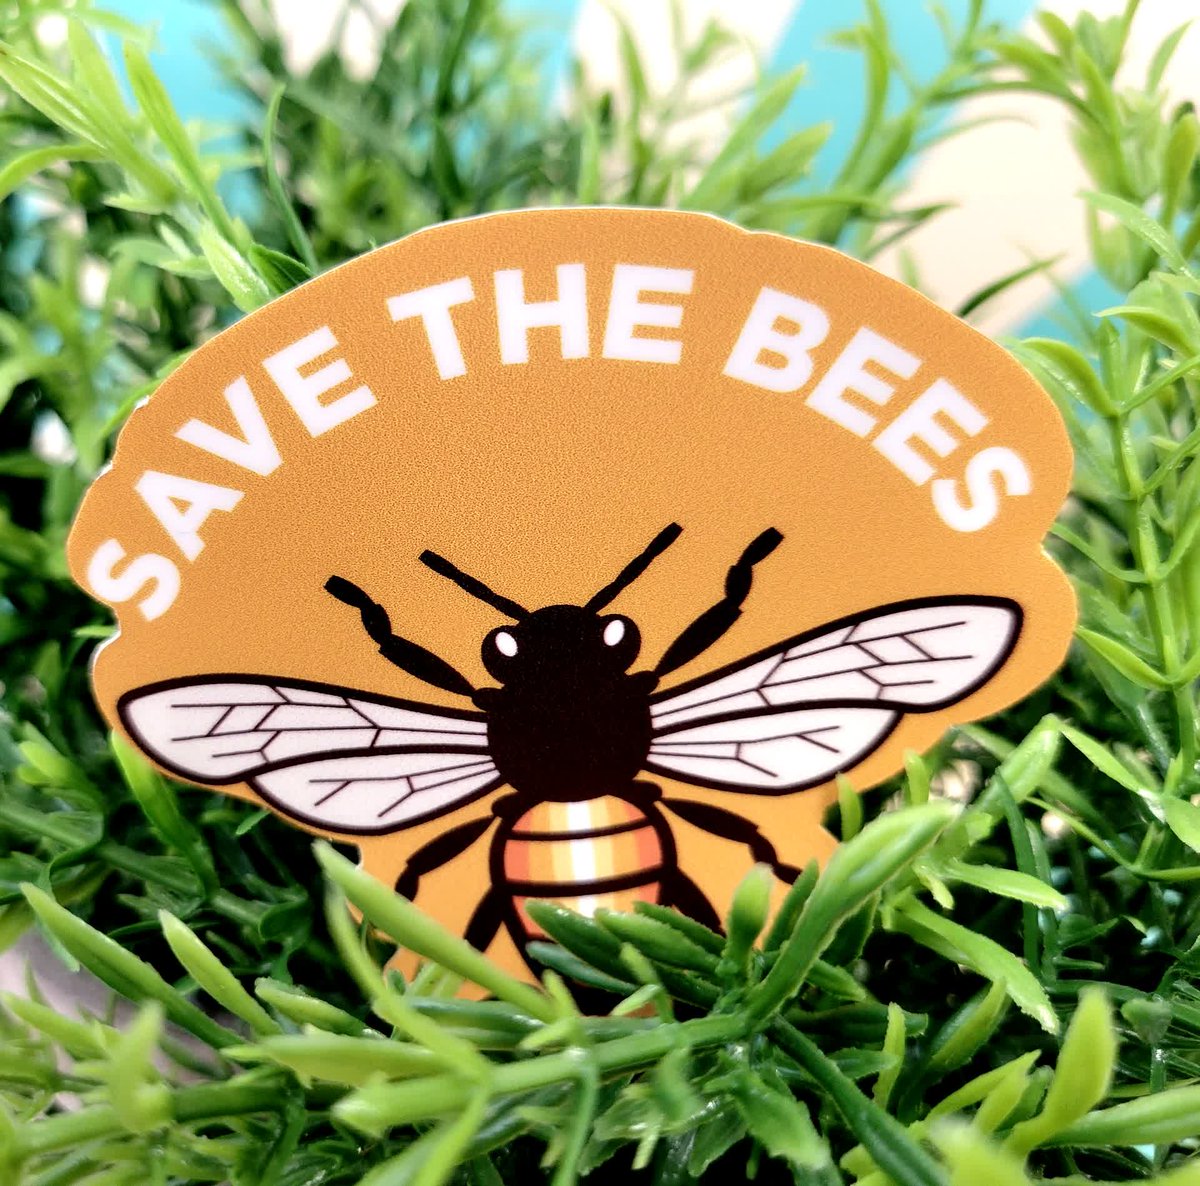 You've gotta appreciate the world we live in. Get your own custom stickers today. Link in bio! #savethebees #bees #beekind #beestickers #stickers #customstickers #faststickers #youstickers